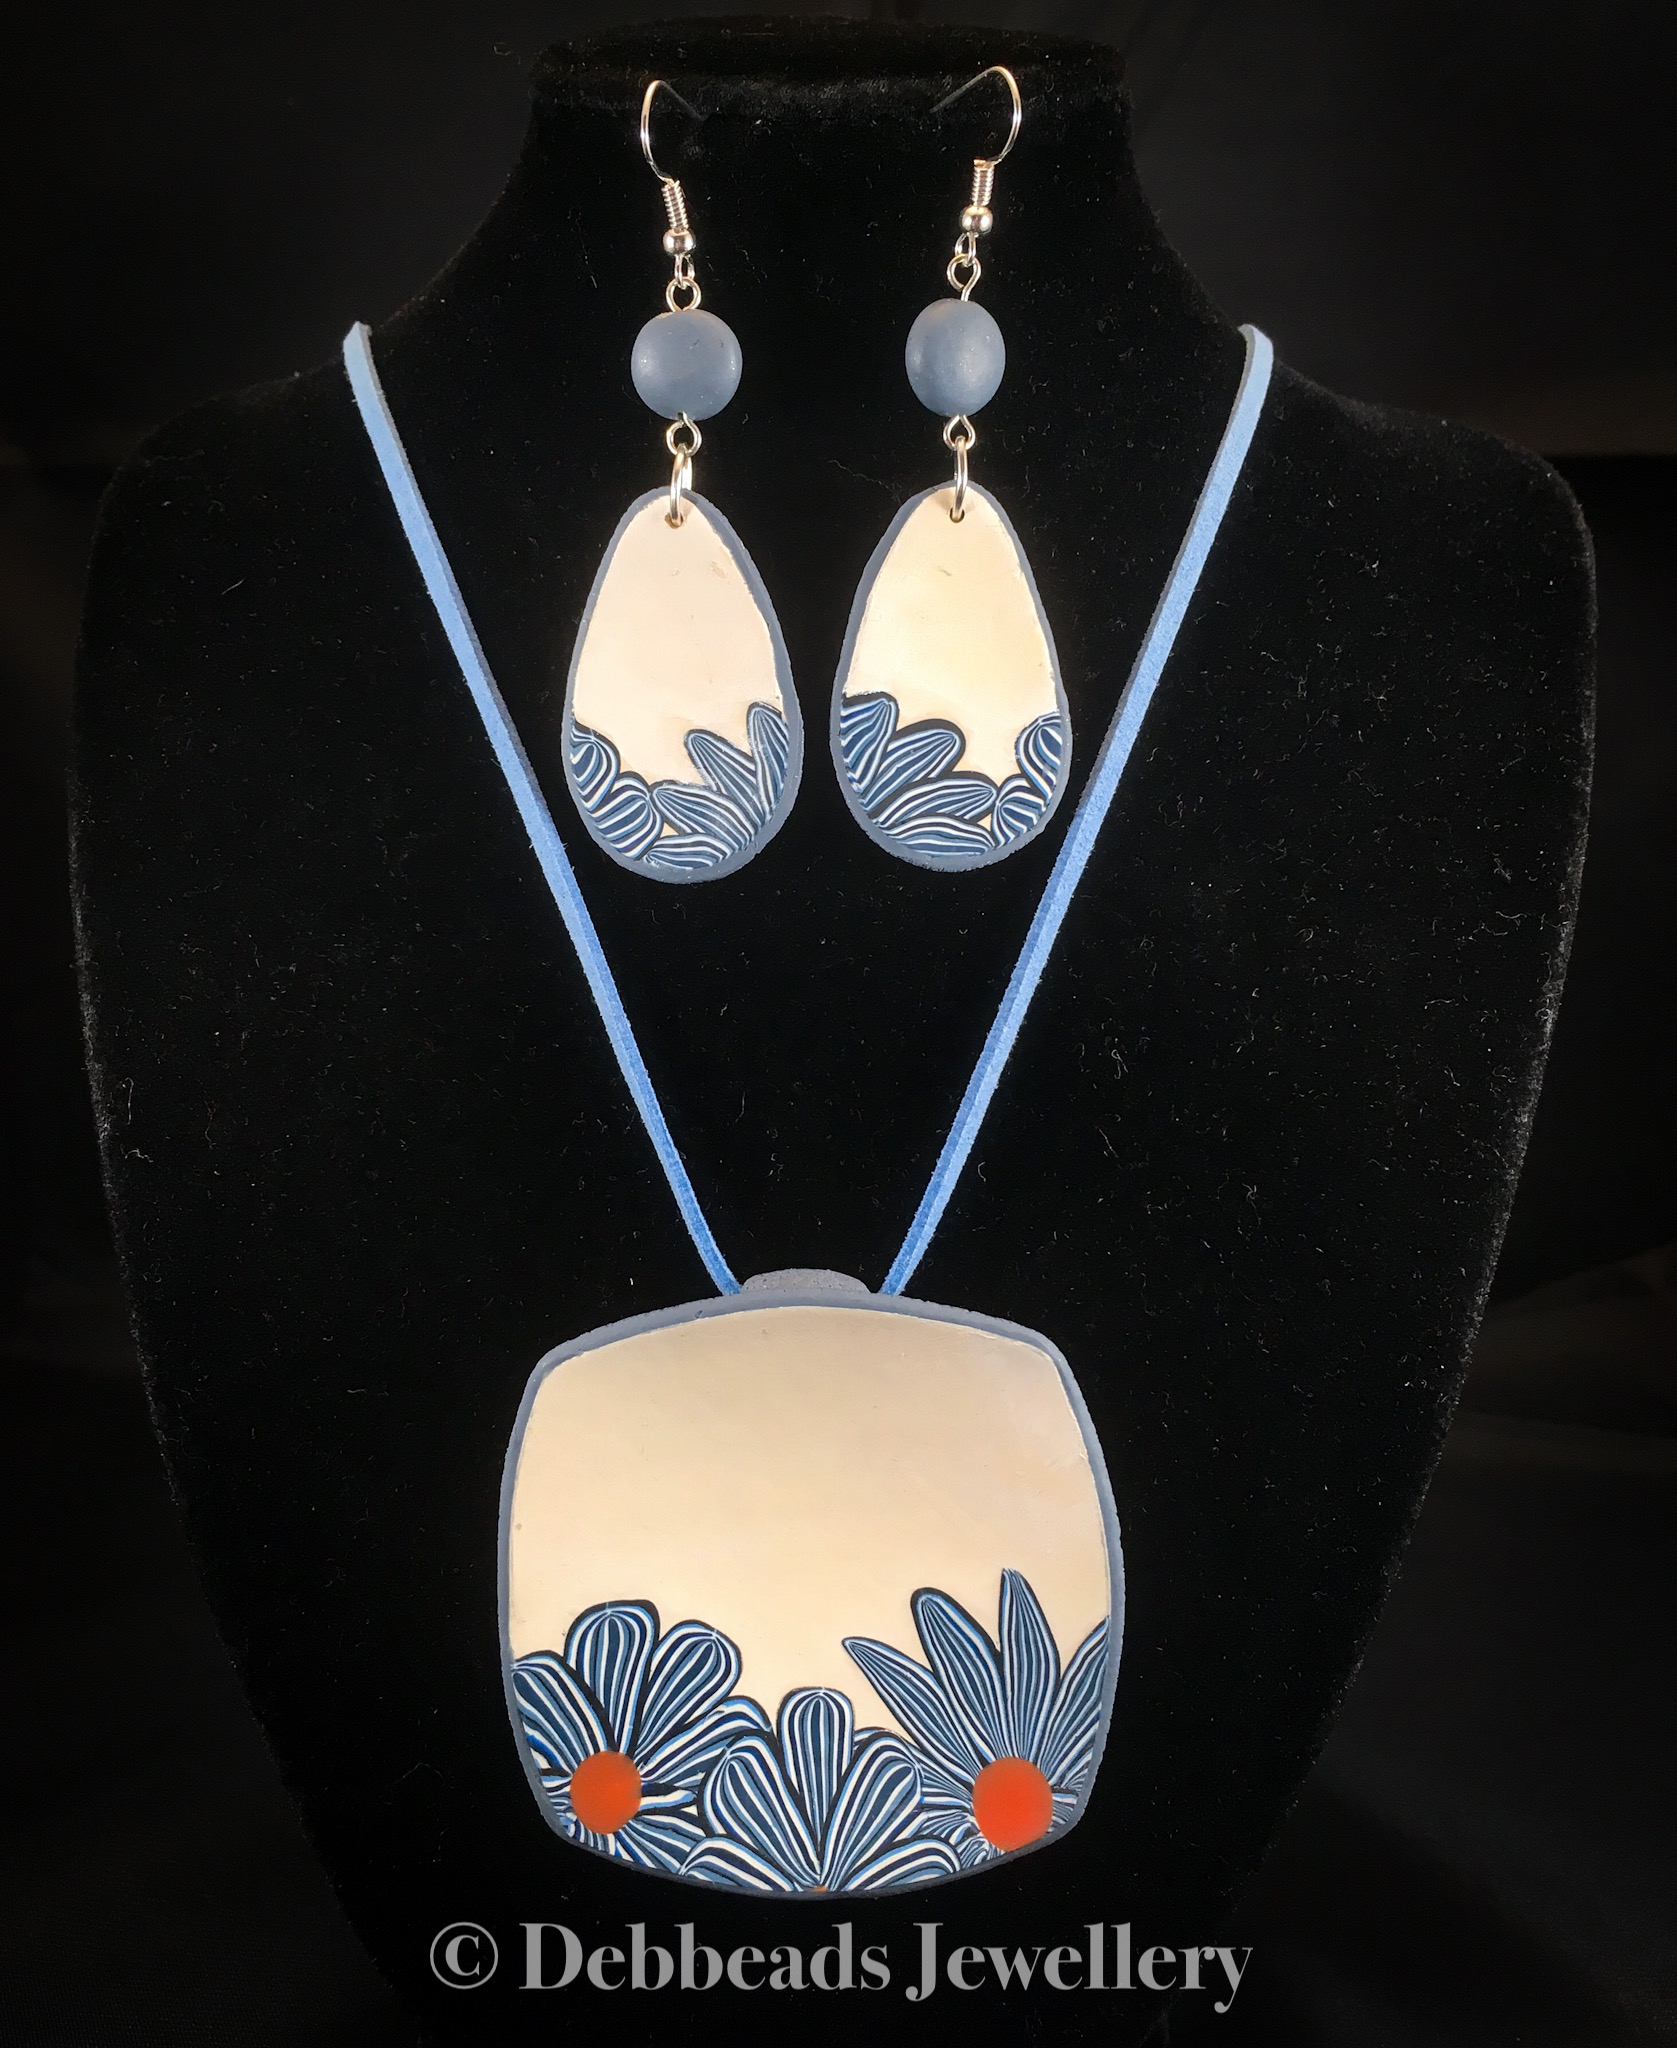 White Square Pendant with blue stripy flowers - showing with matching earrings